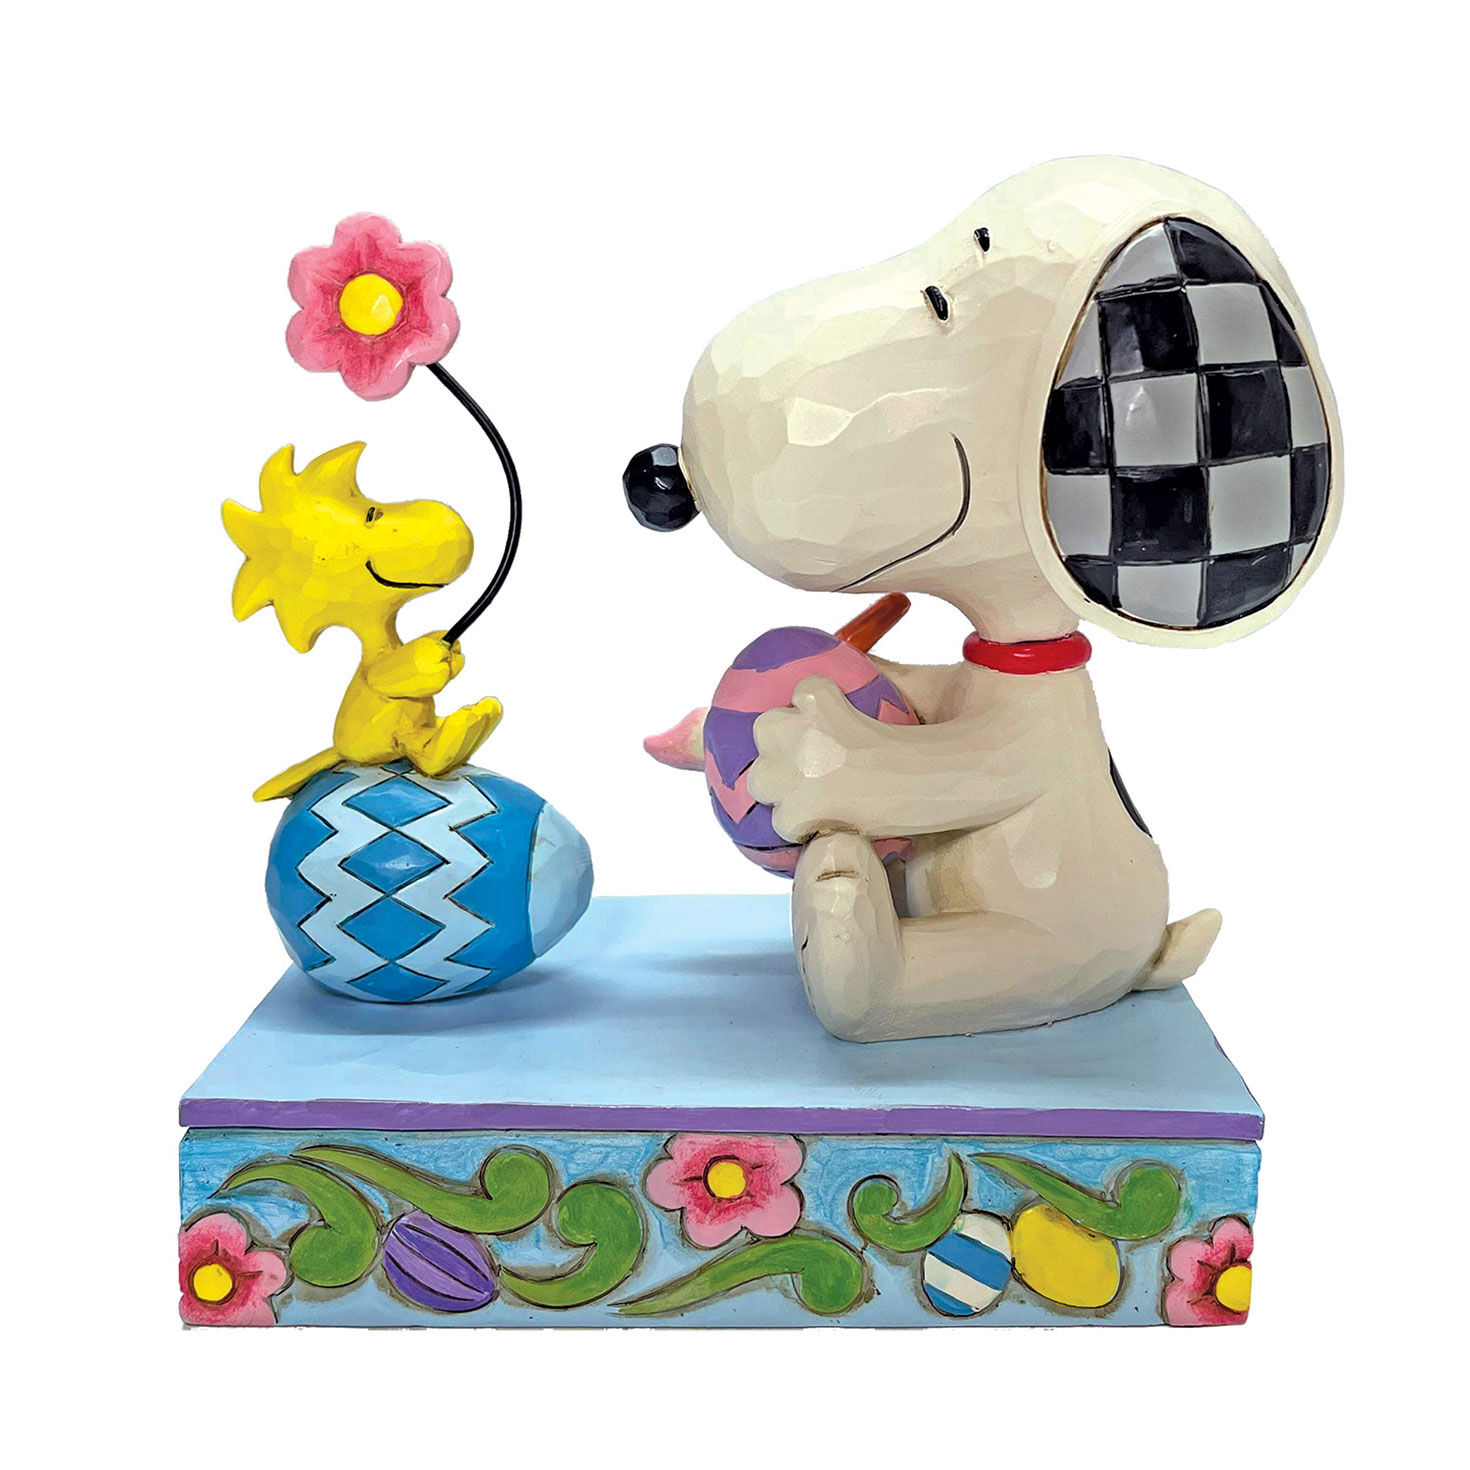 https://www.hallmark.com/dw/image/v2/AALB_PRD/on/demandware.static/-/Sites-hallmark-master/default/dw816a50bc/images/finished-goods/products/6011947/Jim-Shore-Snoopy-&-Woodstock-Easter-Eggs-Figurine_6011947_01.jpg?sfrm=jpg